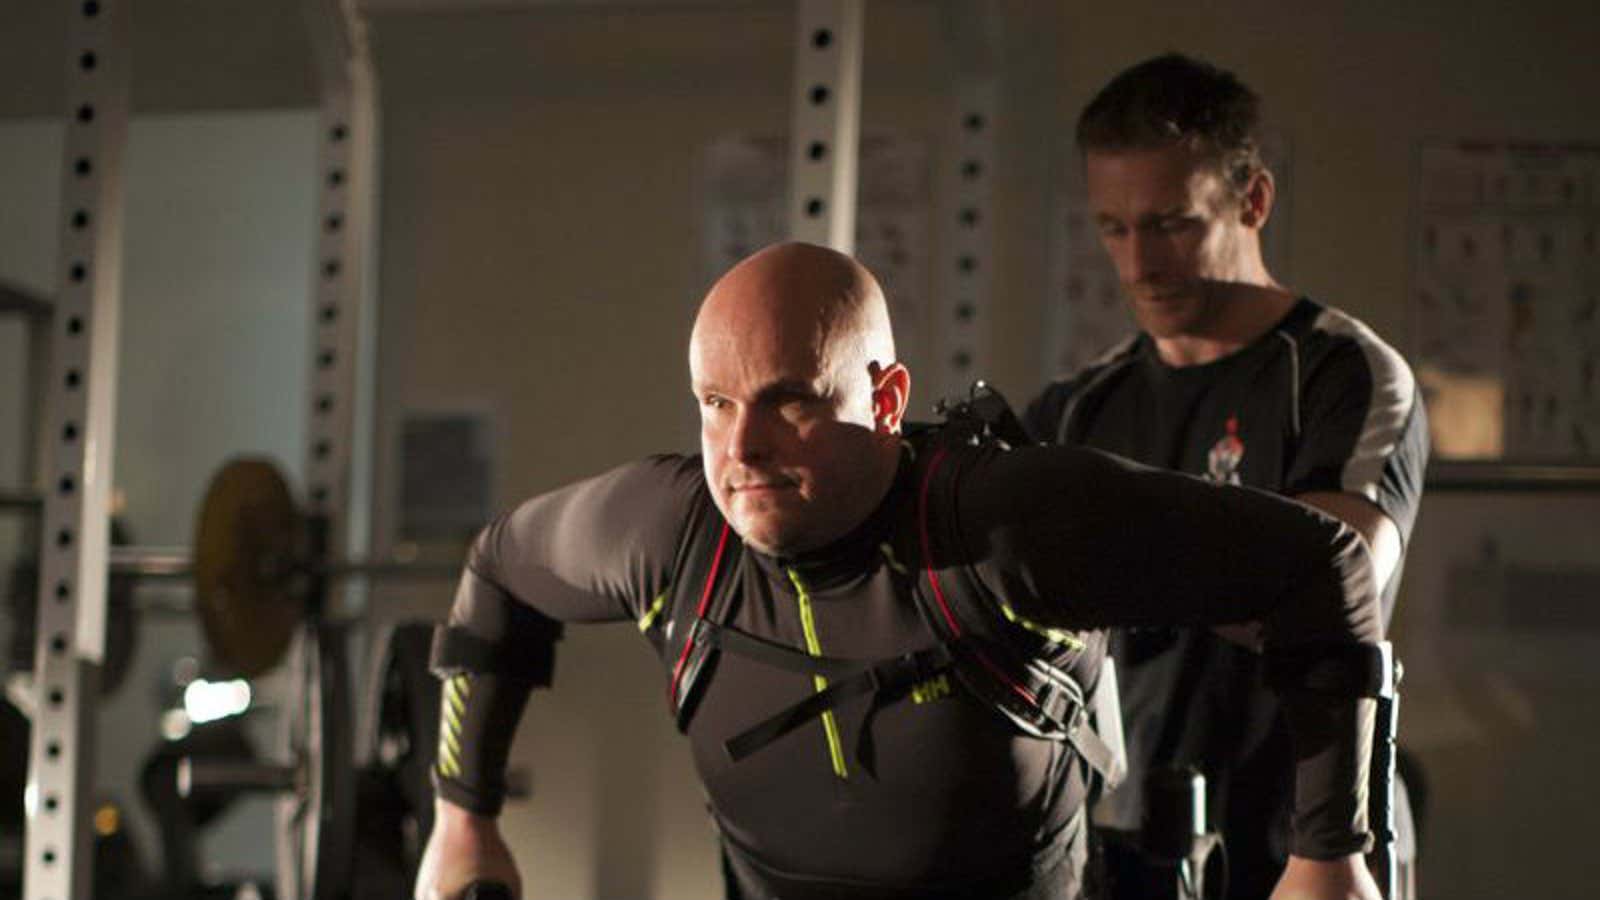 A paralyzed man just walked again, thanks to a robotic exoskeleton